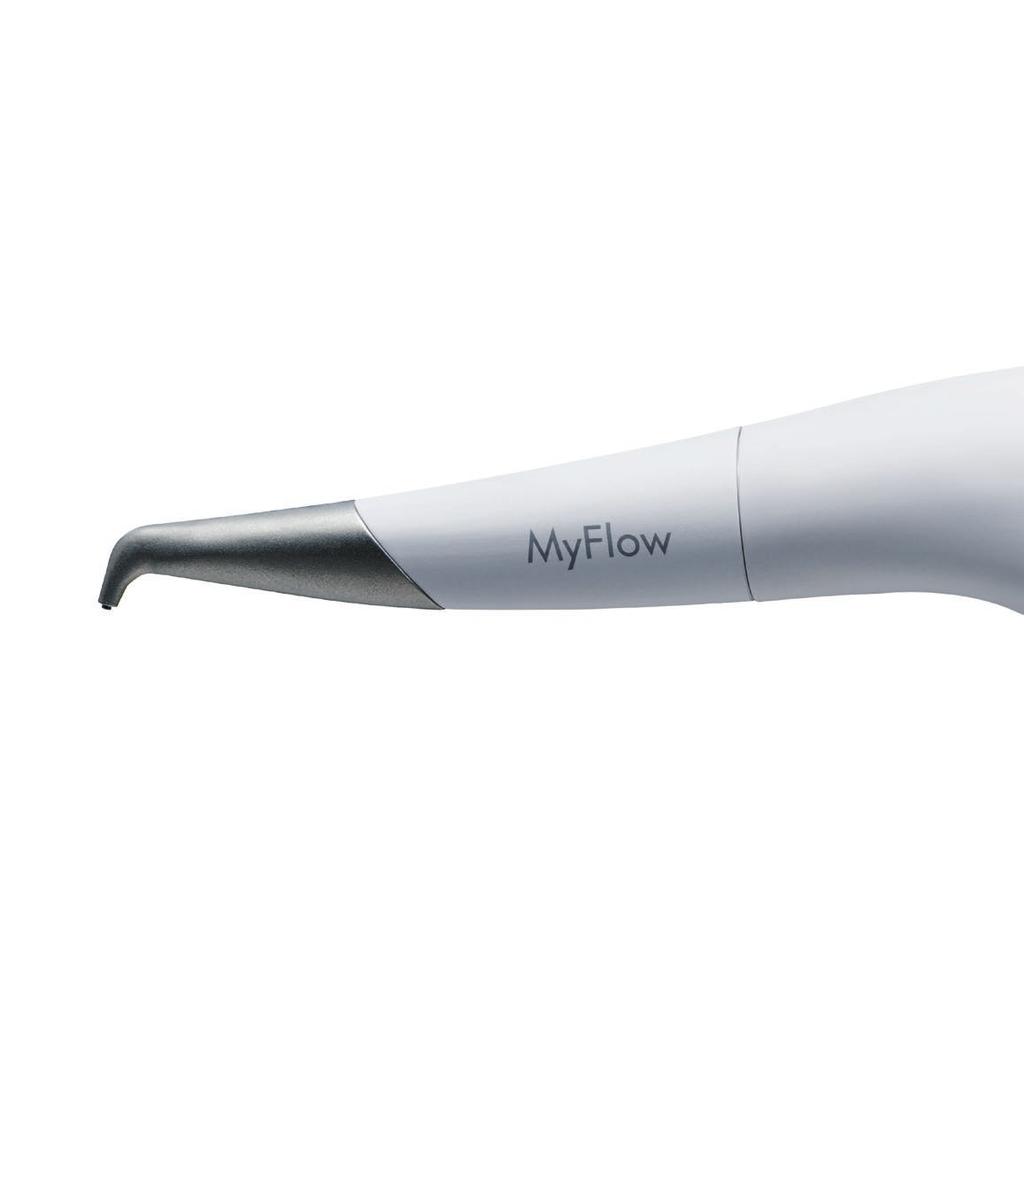 LUNOS MYFLOW. FOR THE PERFECT WORKFLOW. Treatment interruptions are few thanks to the fundamental design of MyFlow.